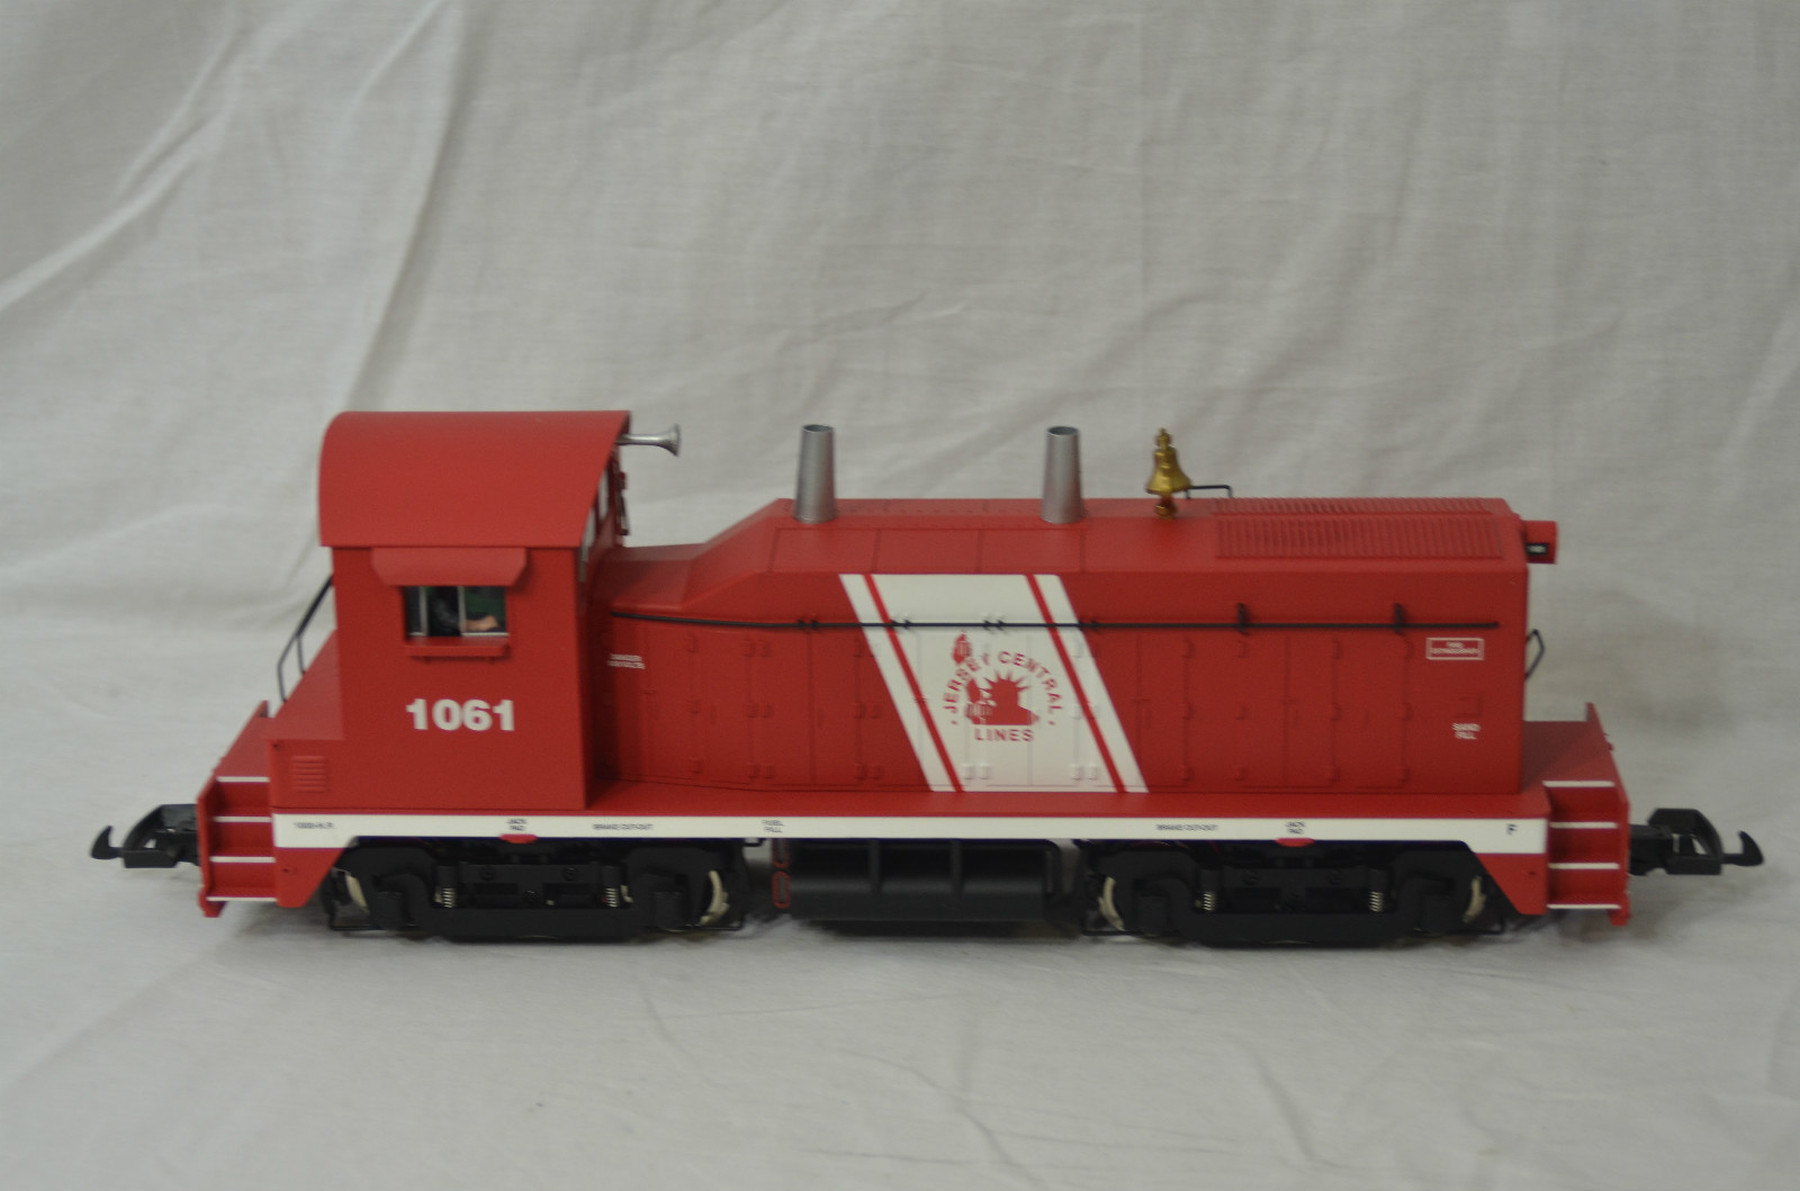 R22033 Jersey Central #1061